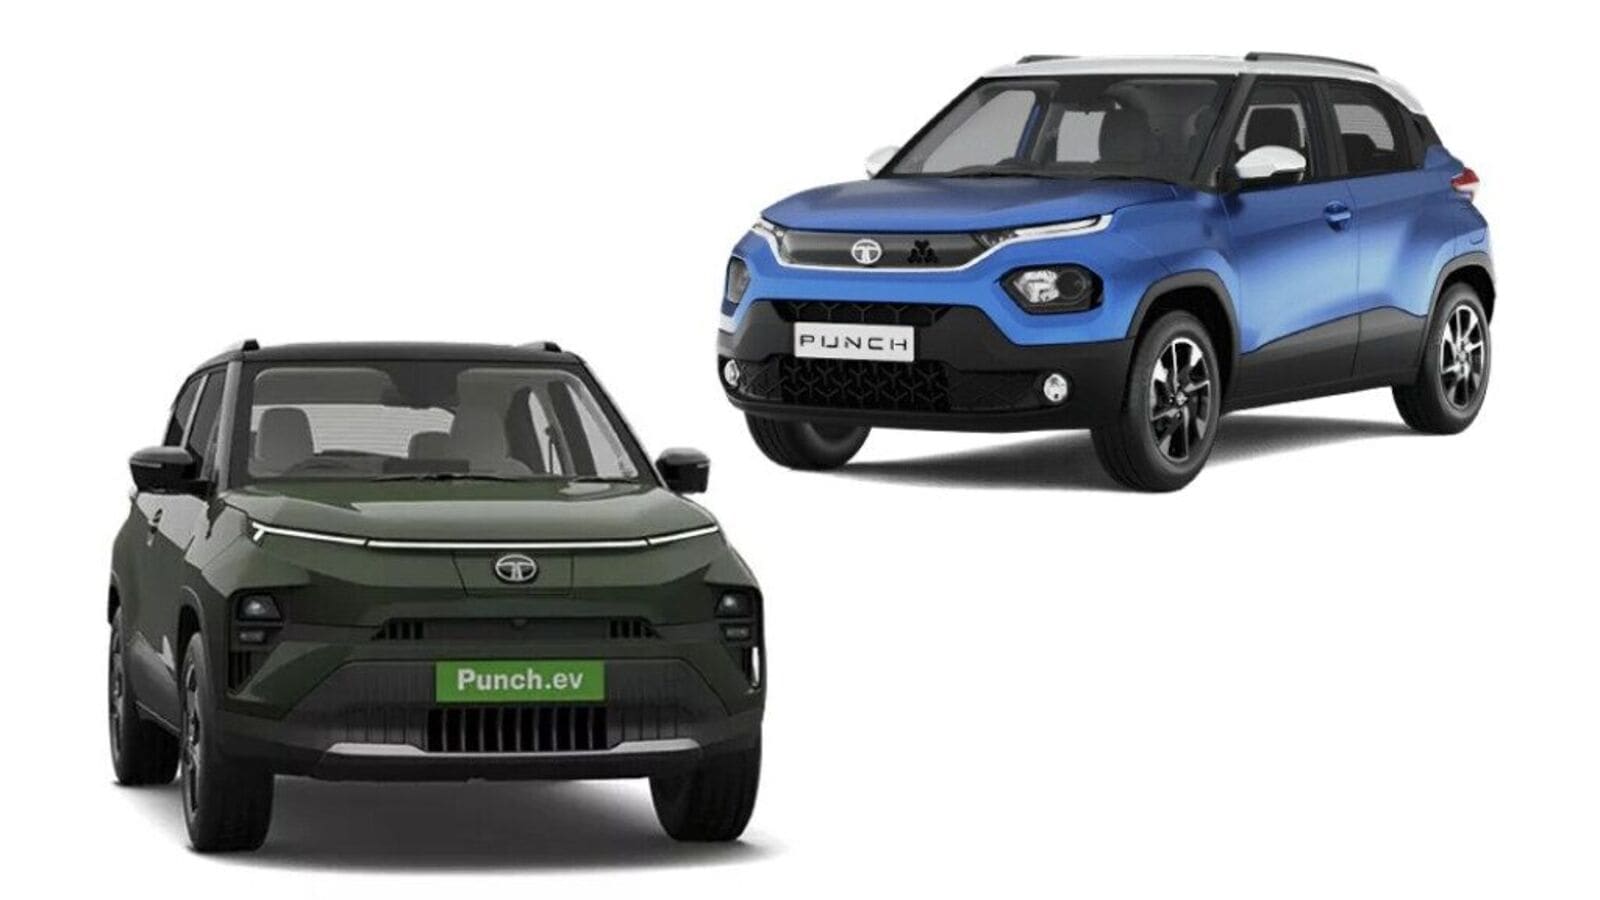 Tata Punch EV vs Tata Punch petrol vs Tata Punch CNG: Price and specification